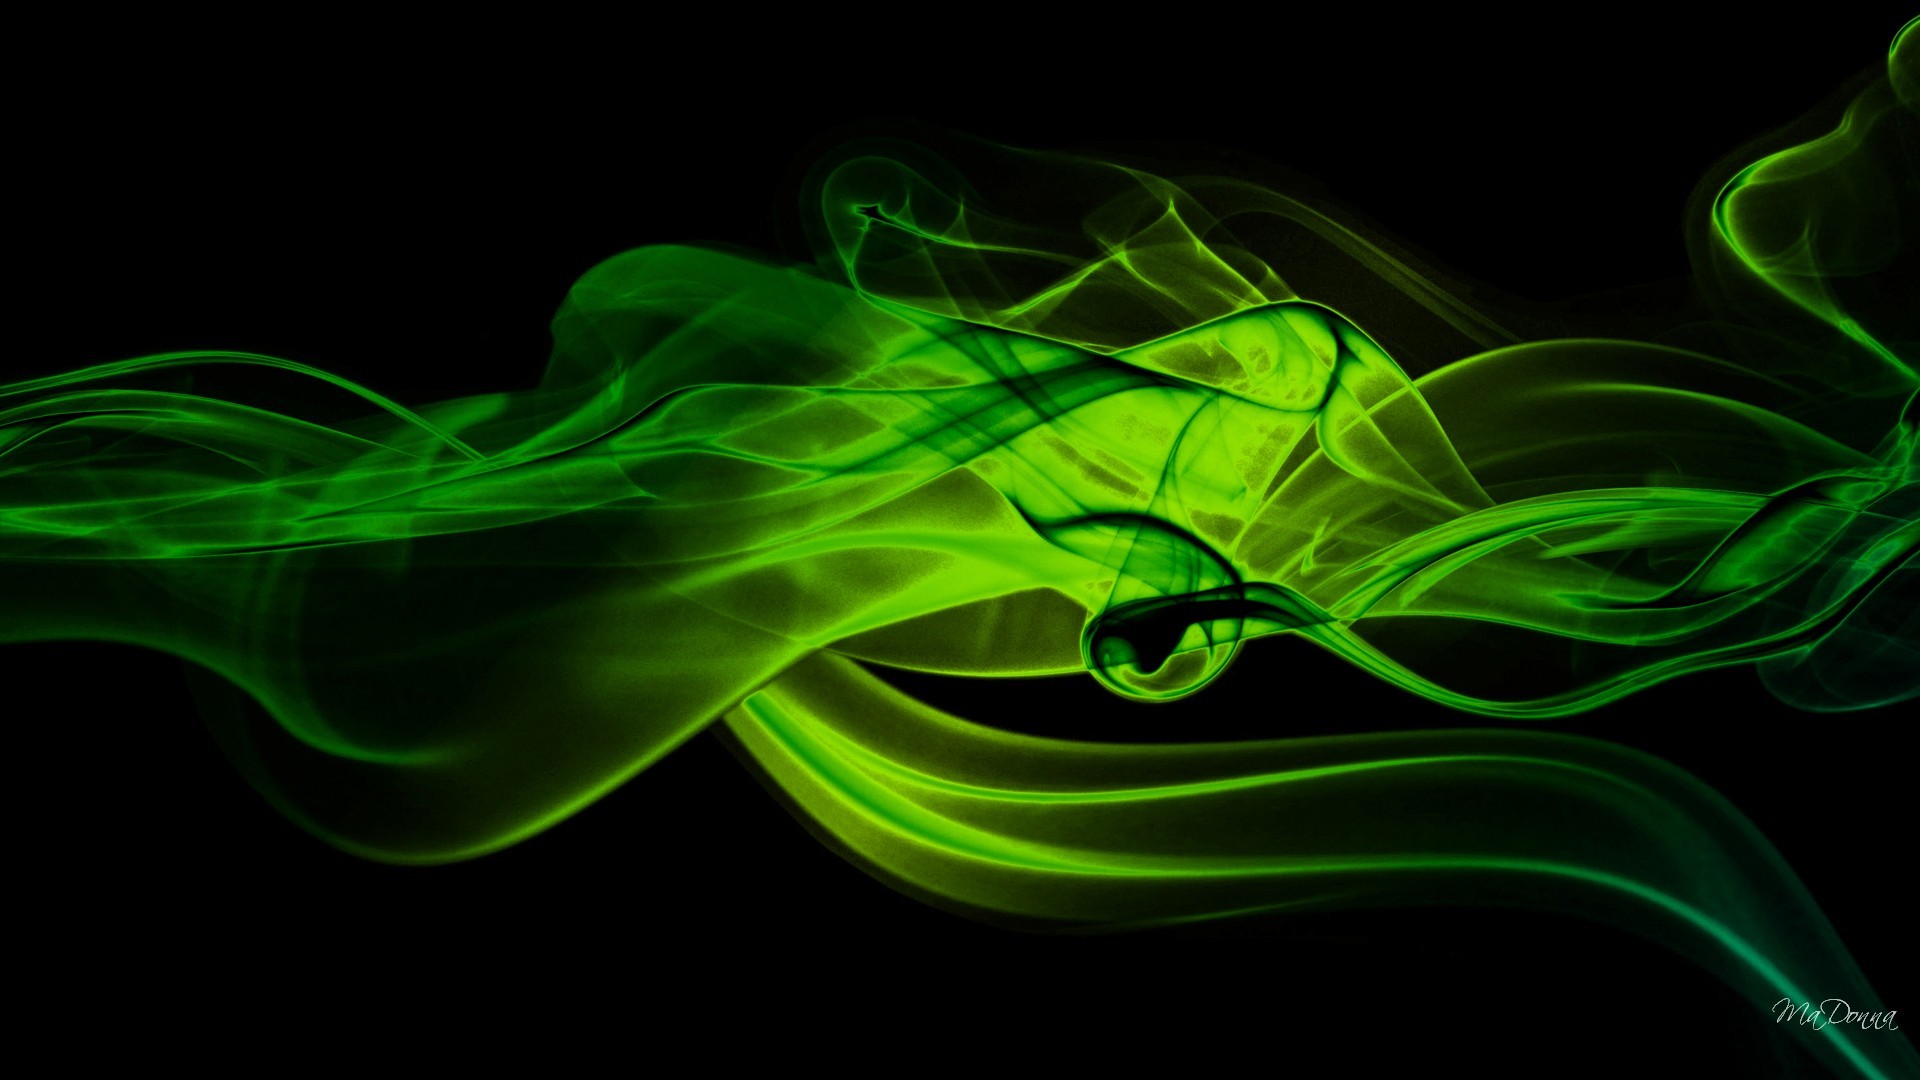 1920x1080 Black And Green Abstract Wallpaper Widescreen 2 HD Wallpapers